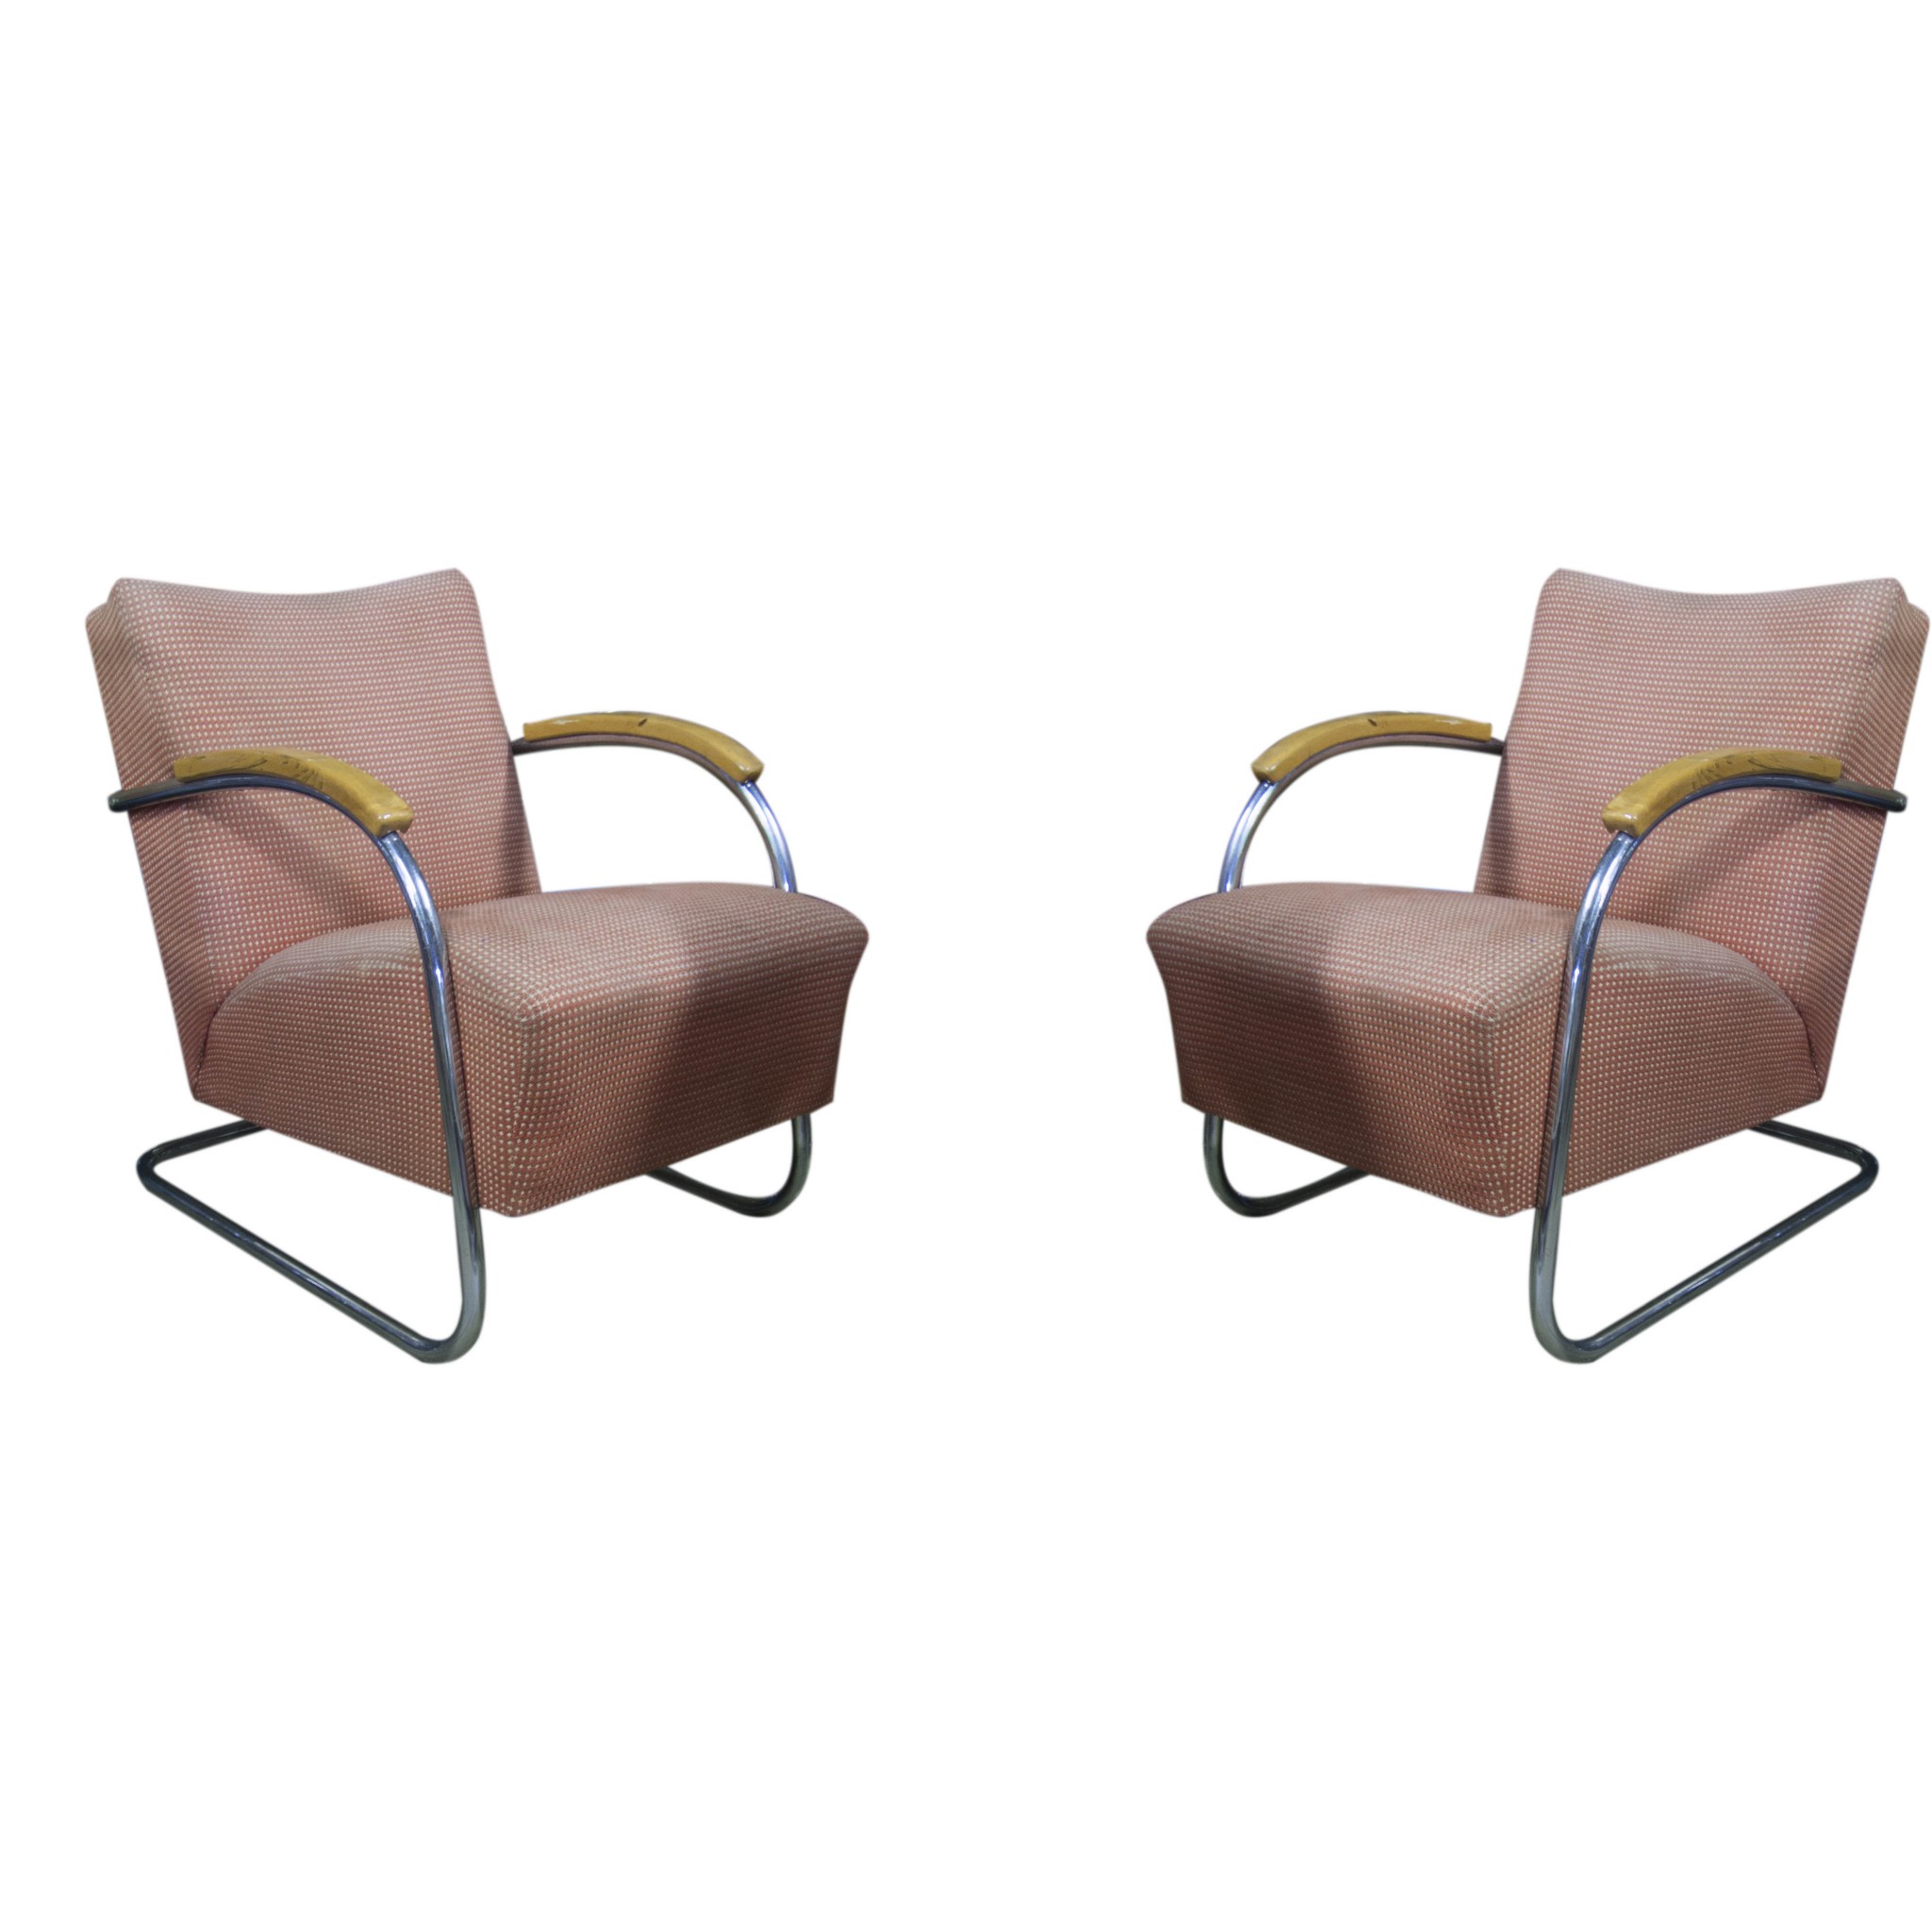 A Pair of armchairs from the Bauhaus period, Mücke Melder